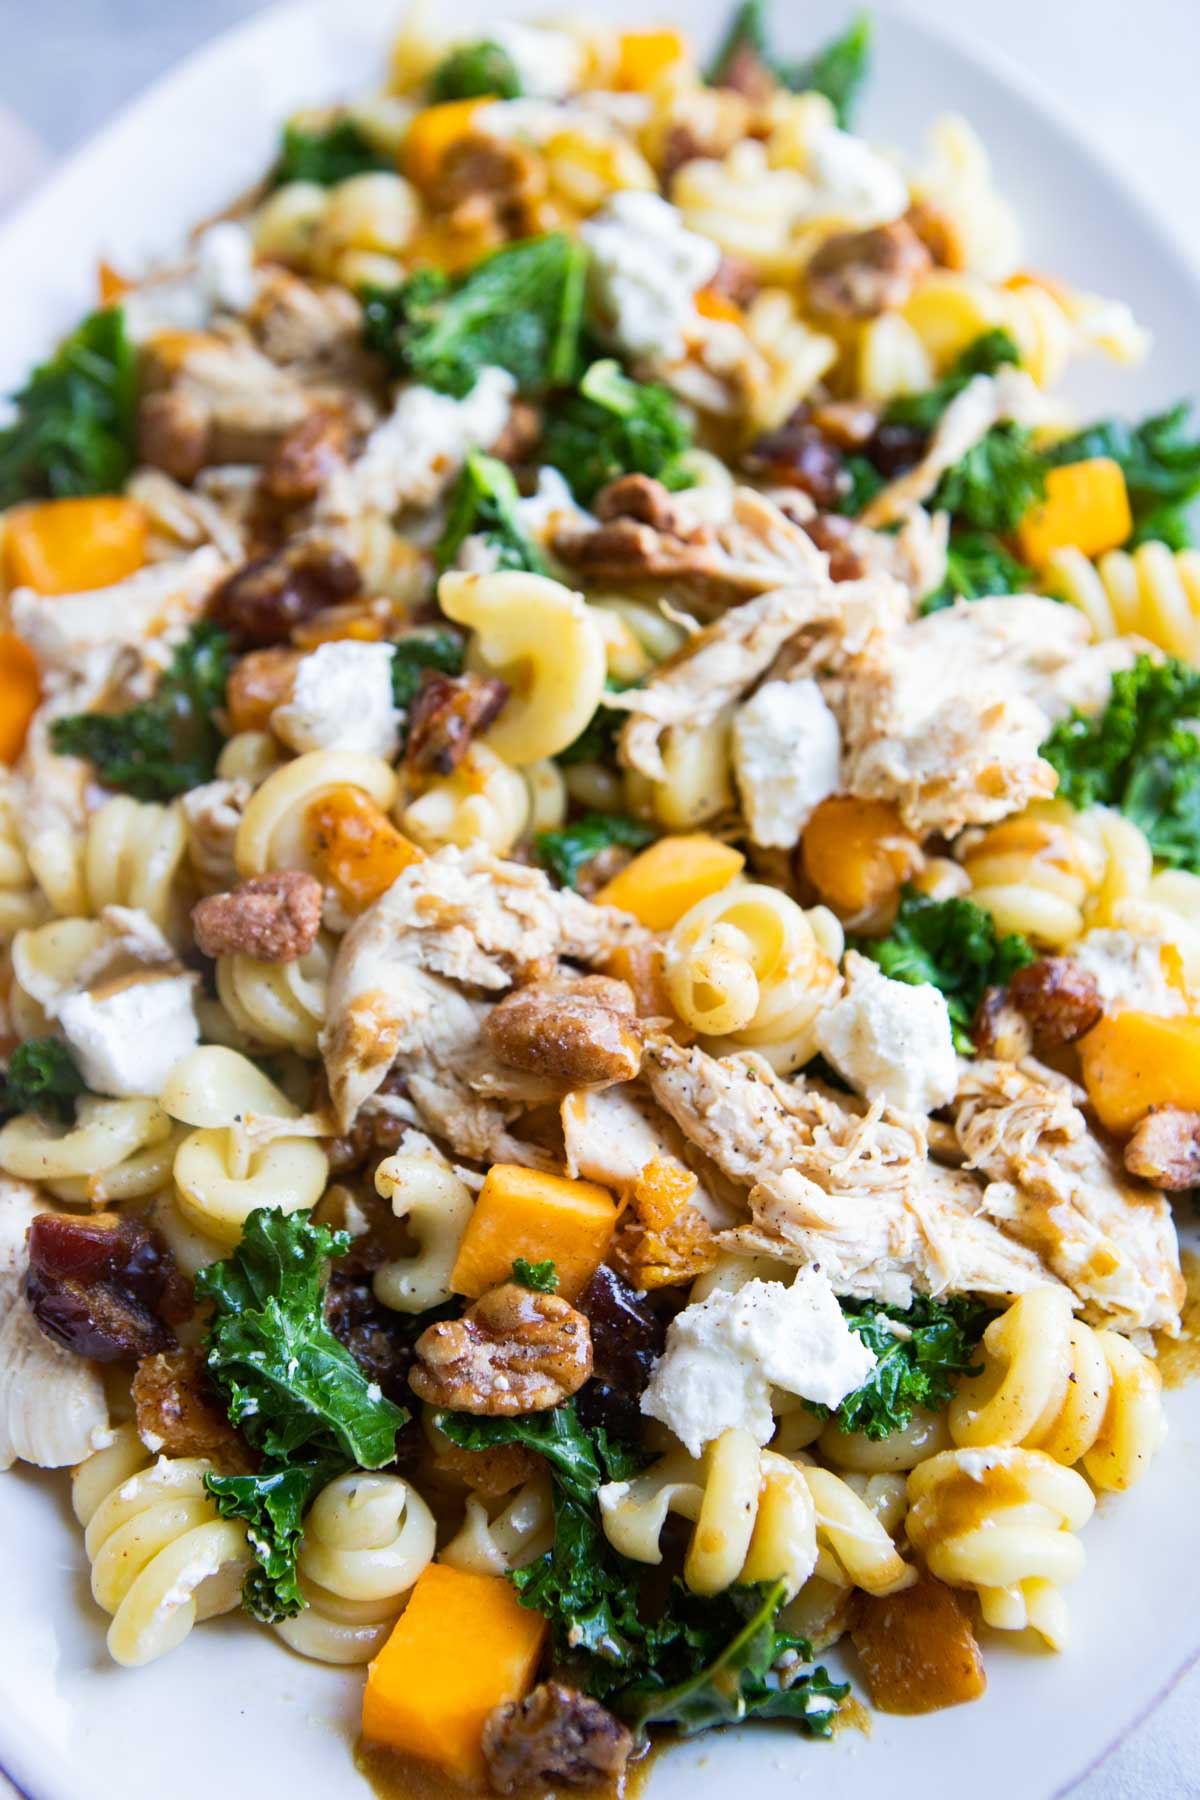 pasta and kale salad with shredded chicken, butternut squash and goat cheese on a white platter